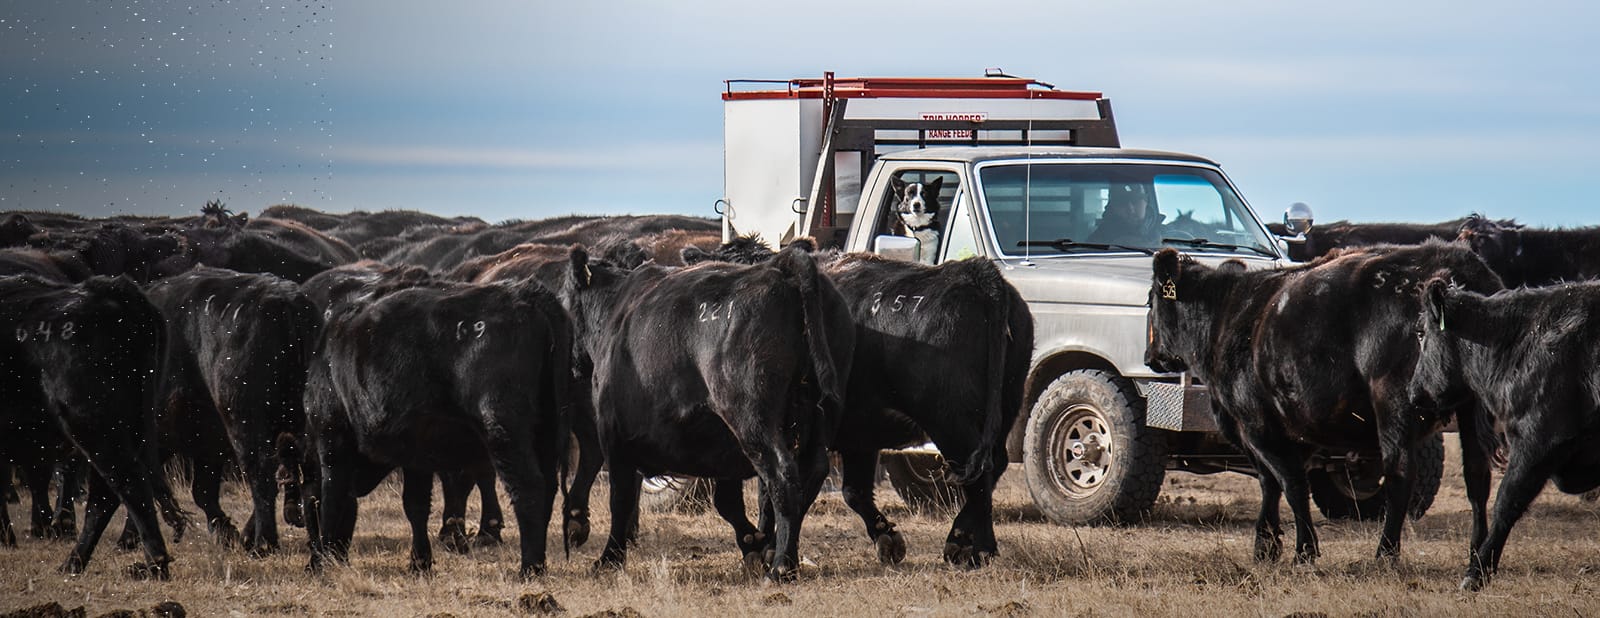 cows with truck in background